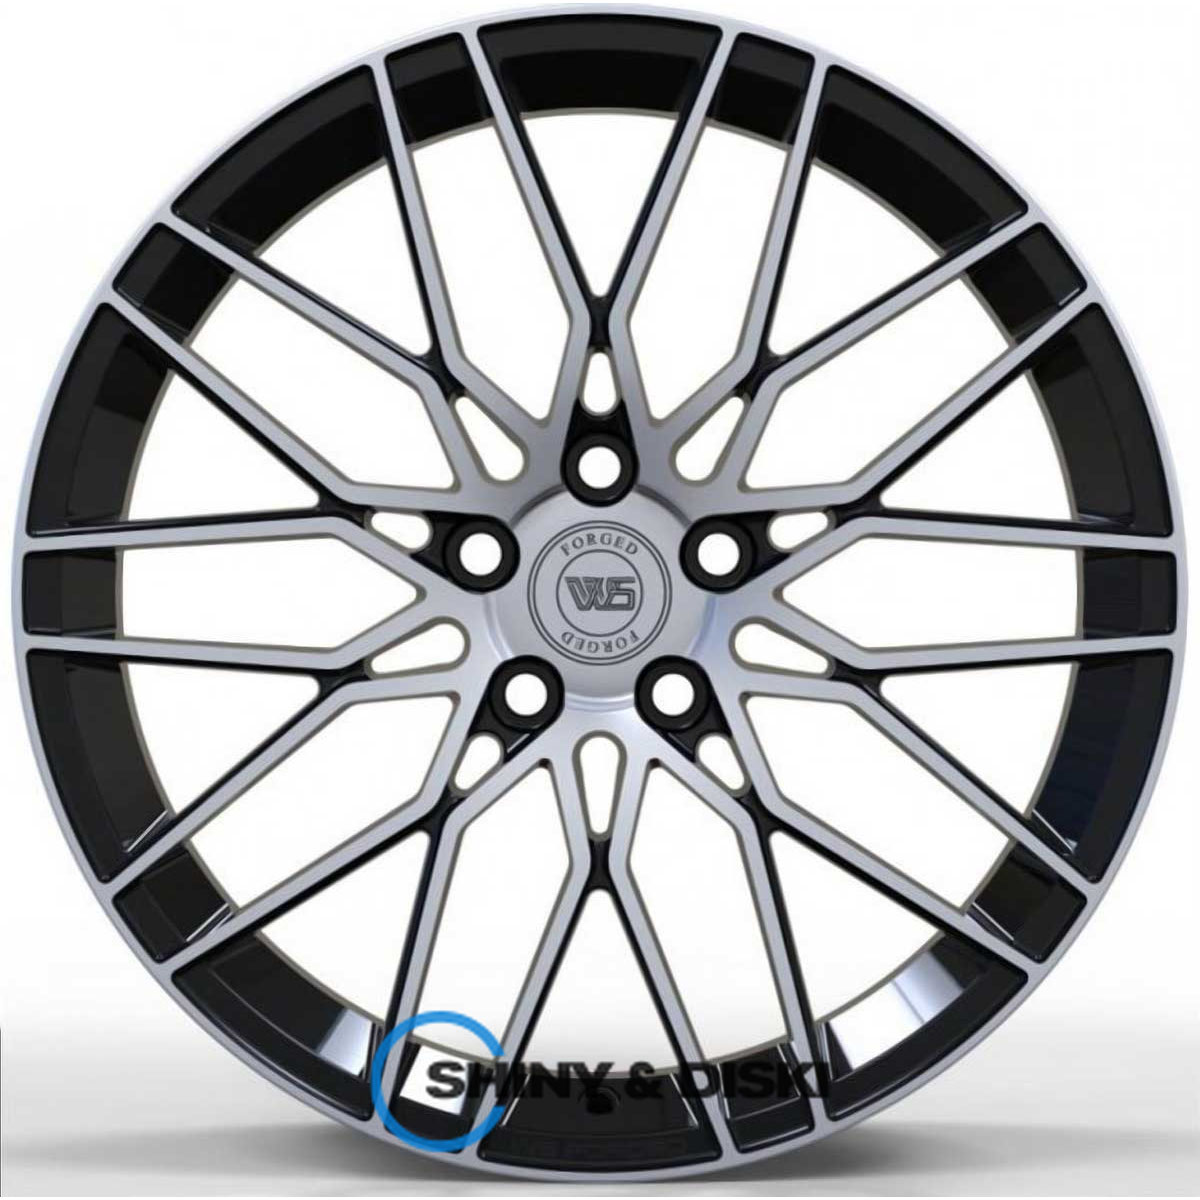 ws forged ws594c gloss black with machined face r19 w8 pcd5x114.3 et50 dia60.1